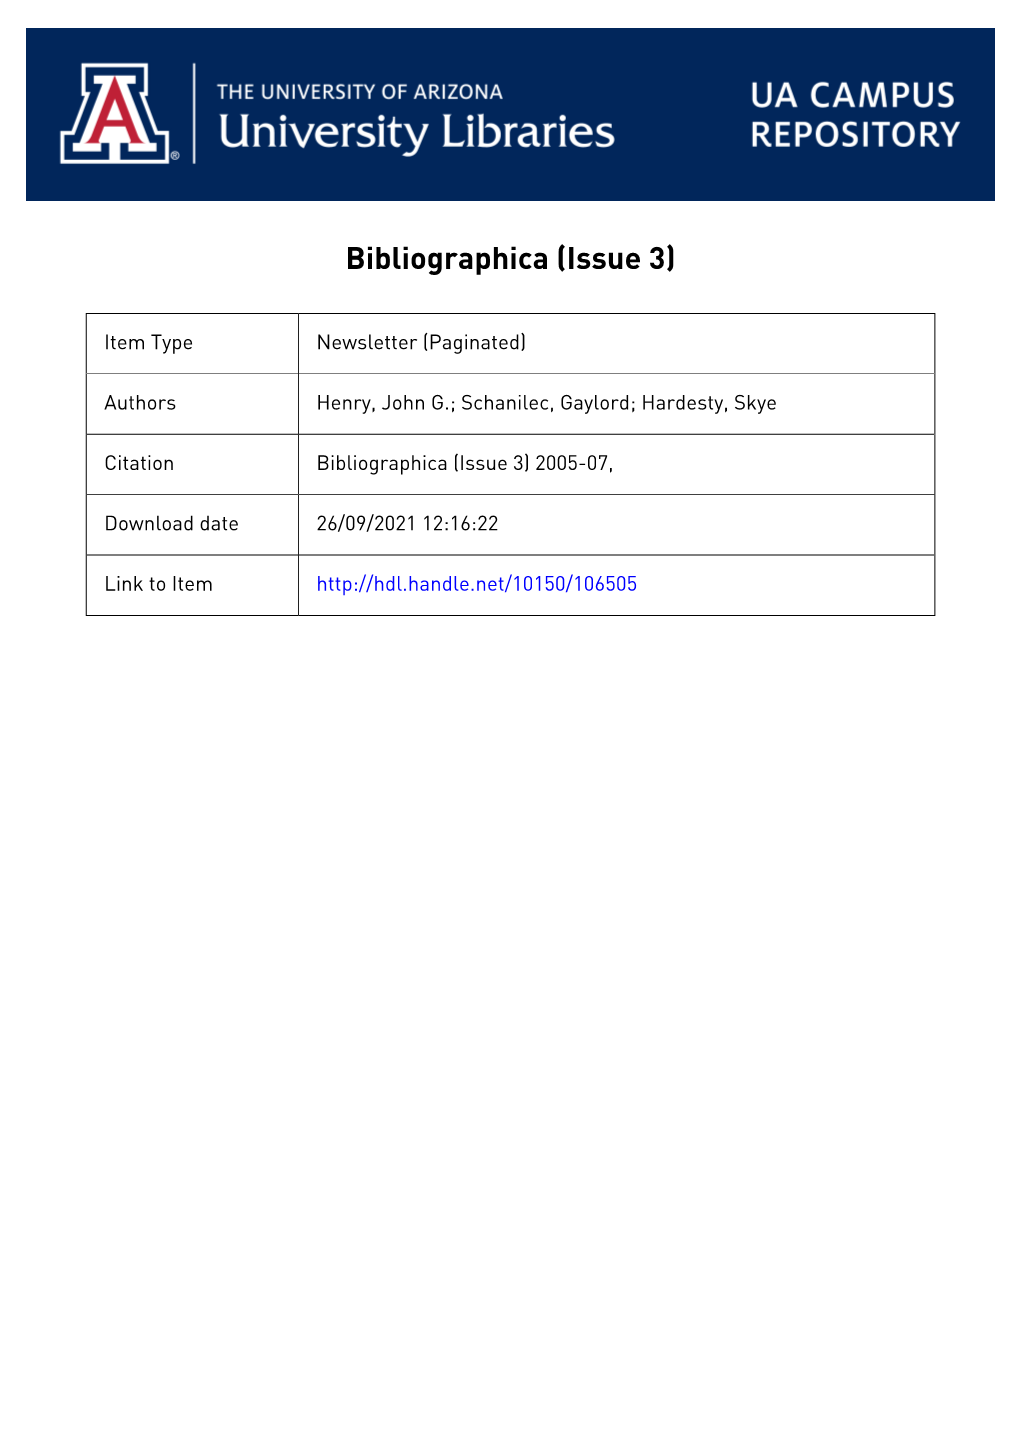 Bibliographica (Issue 3)